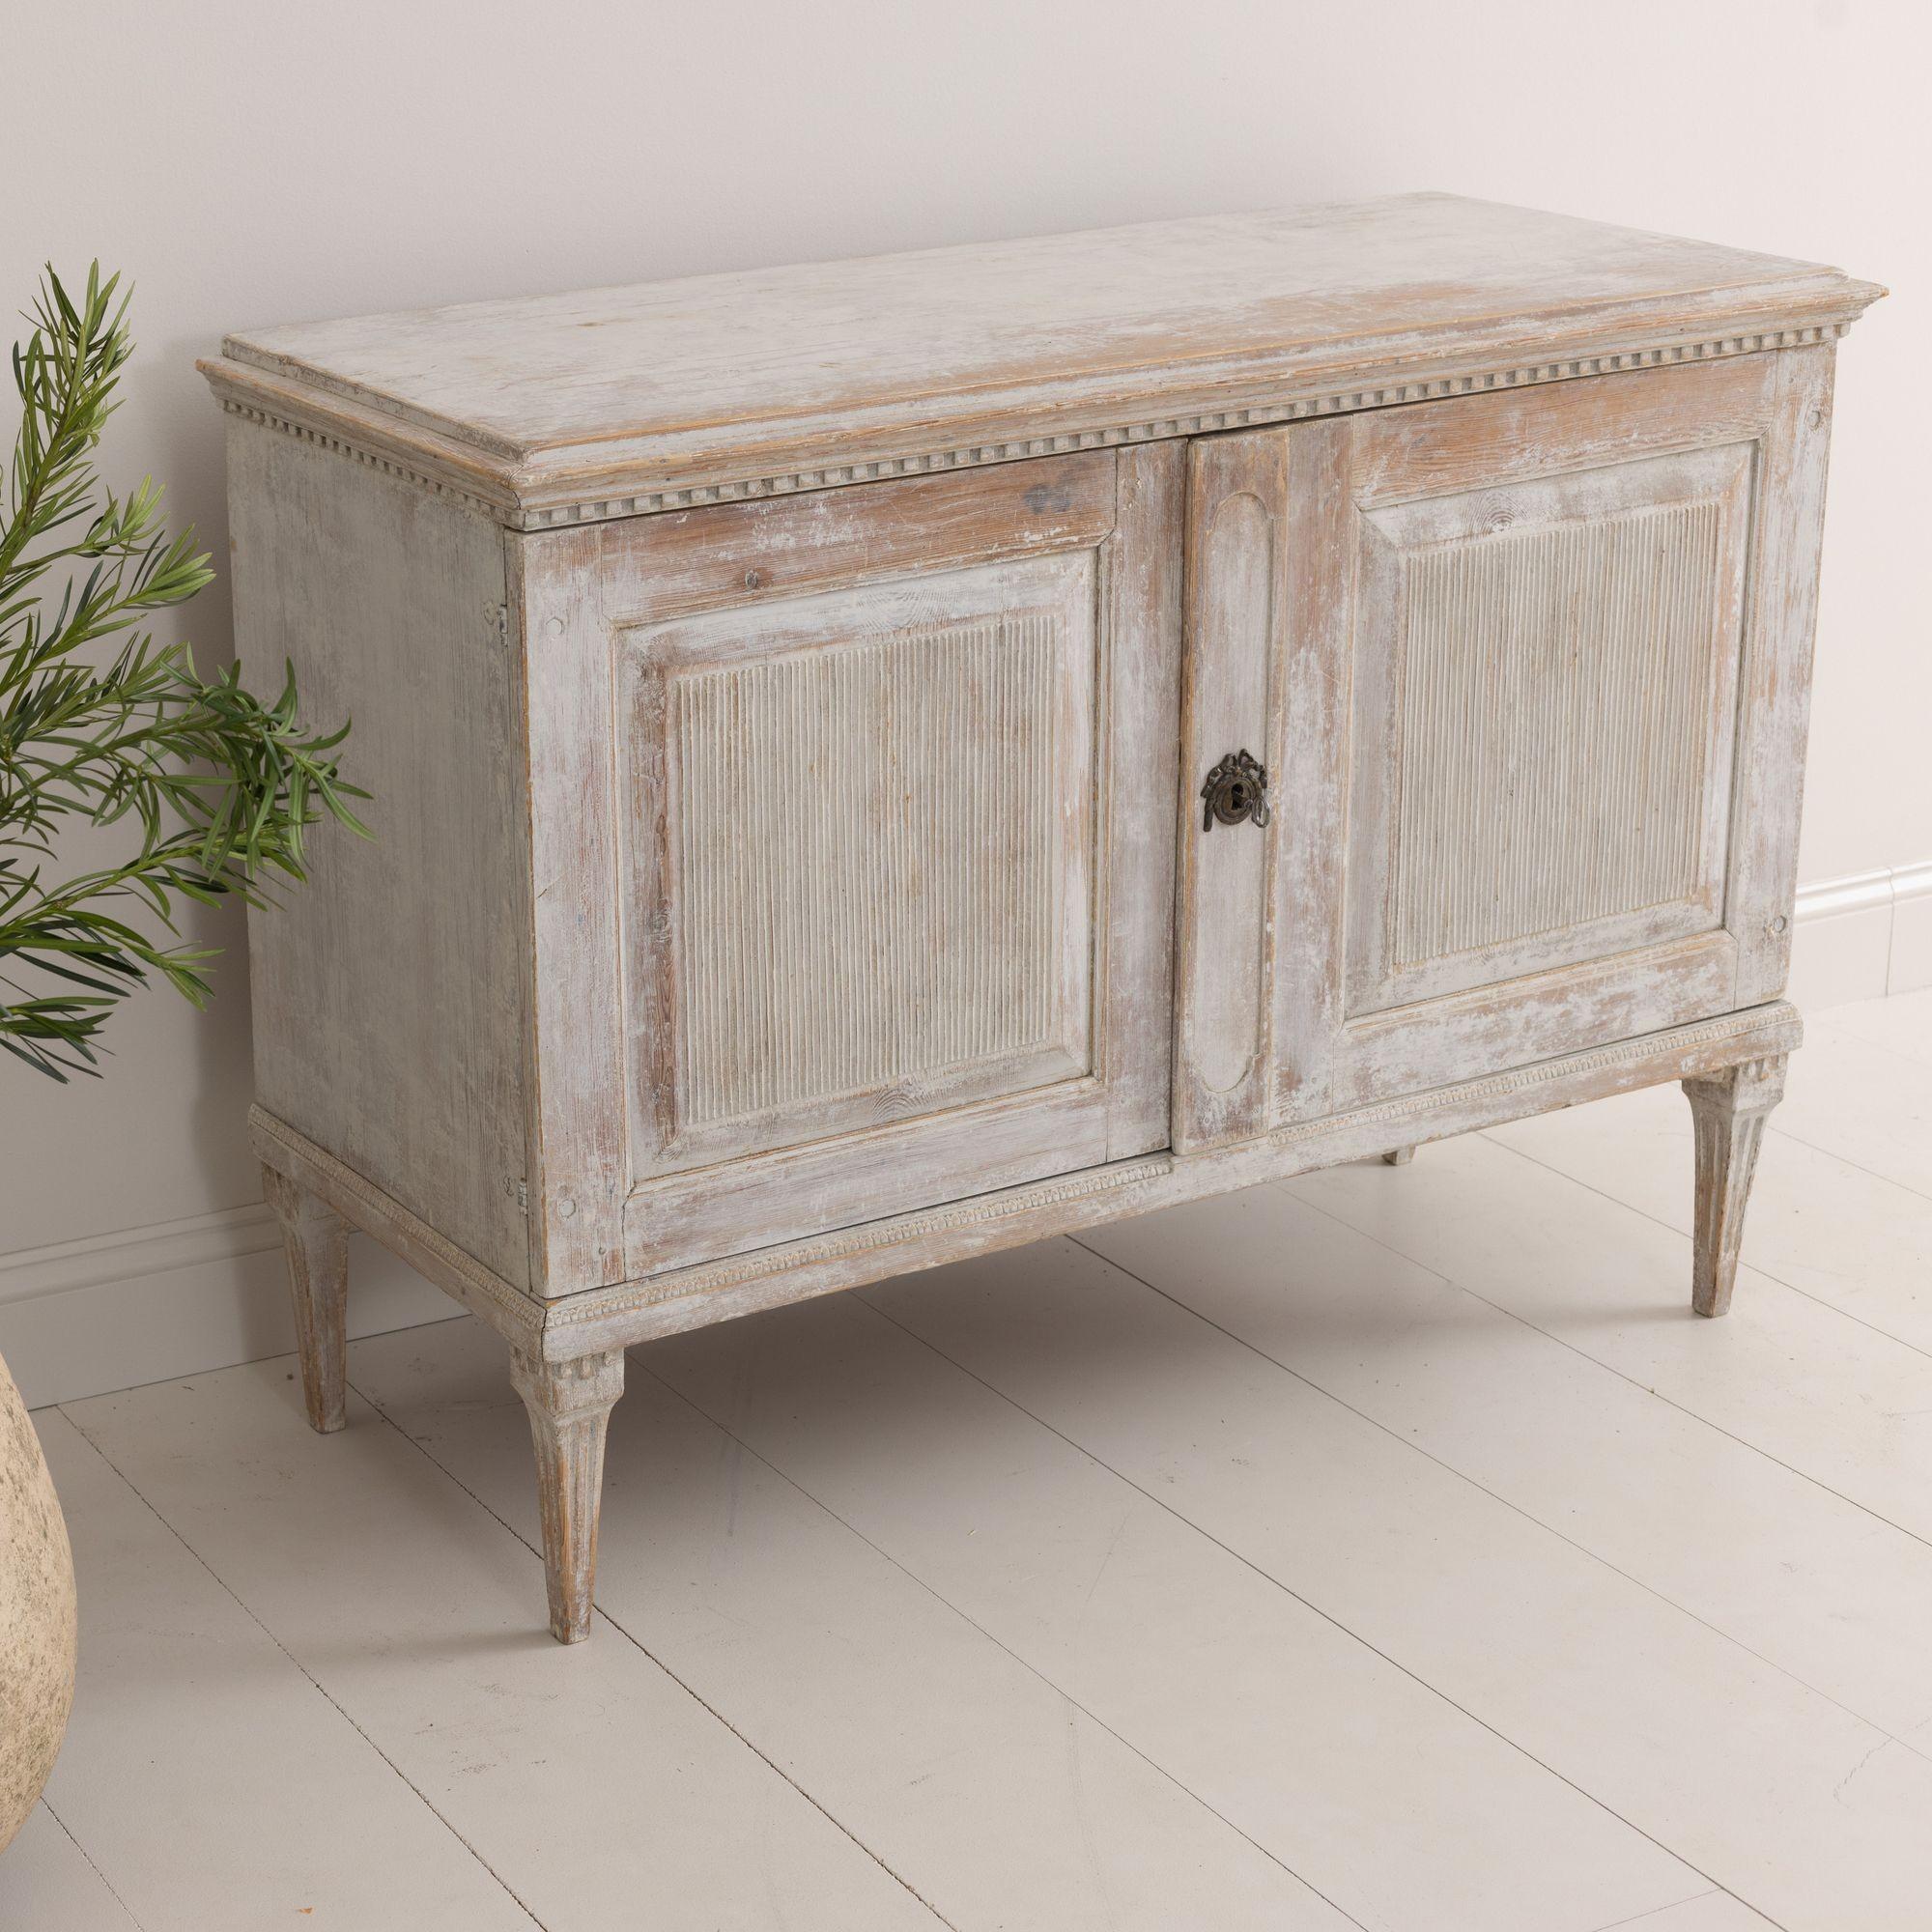 A rare 18th century Swedish buffet from the Gustavian period, dry scraped back to reveal the original white paint and natural wood surface. This beautiful buffet has dentil molding around the top, two large reeded doors, and is raised upon elongated